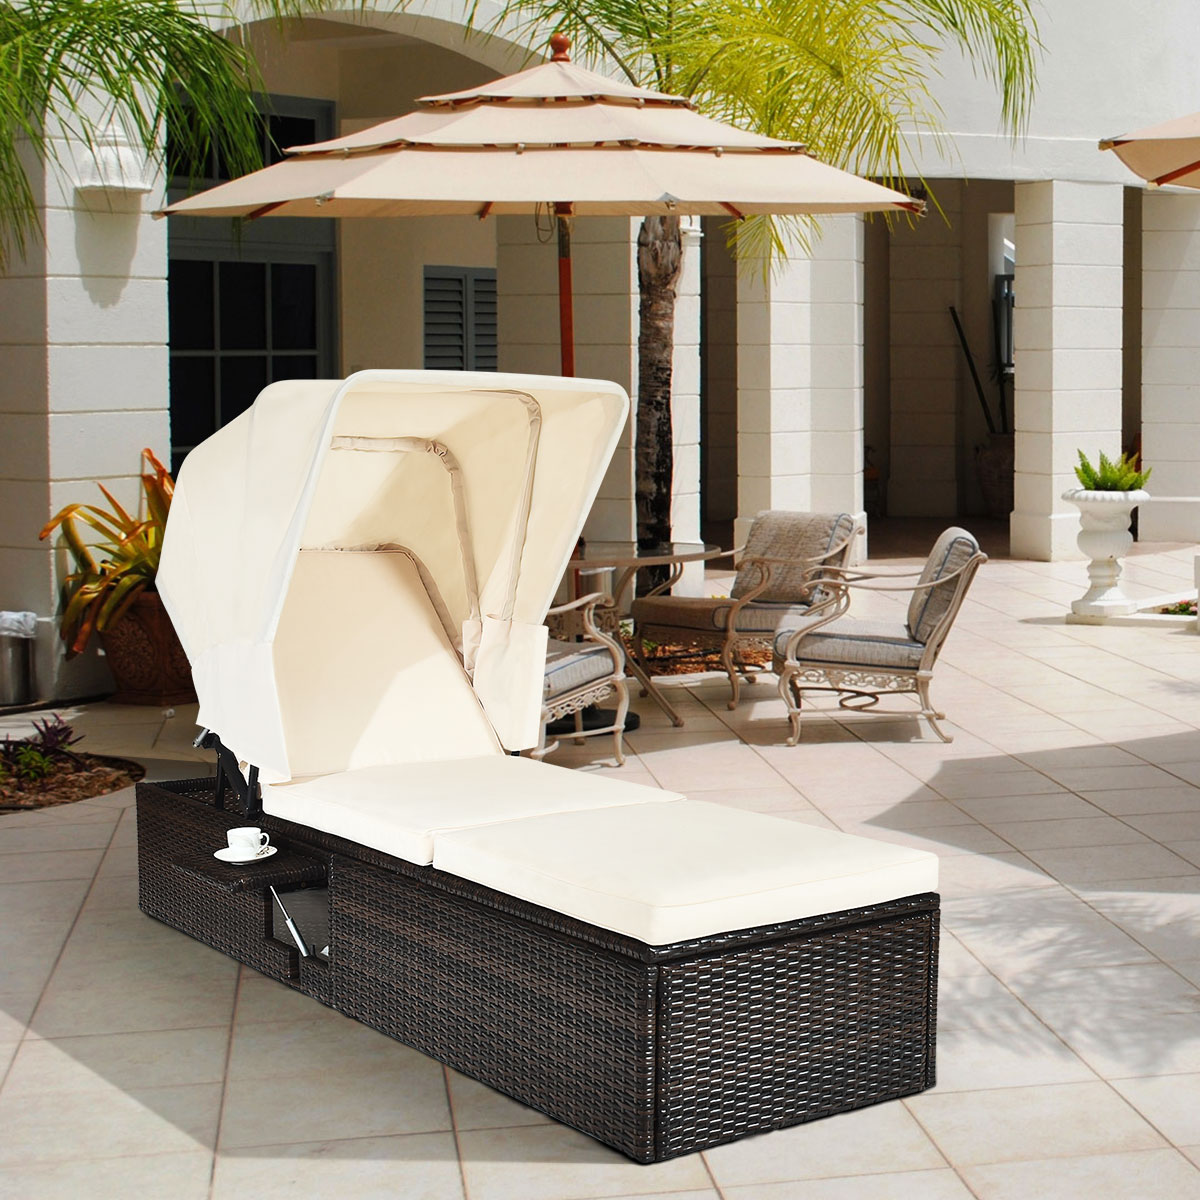 Topbuy Outdoor Cushioned Reclining Chaise Lounge w/Folding Canopy - image 2 of 7